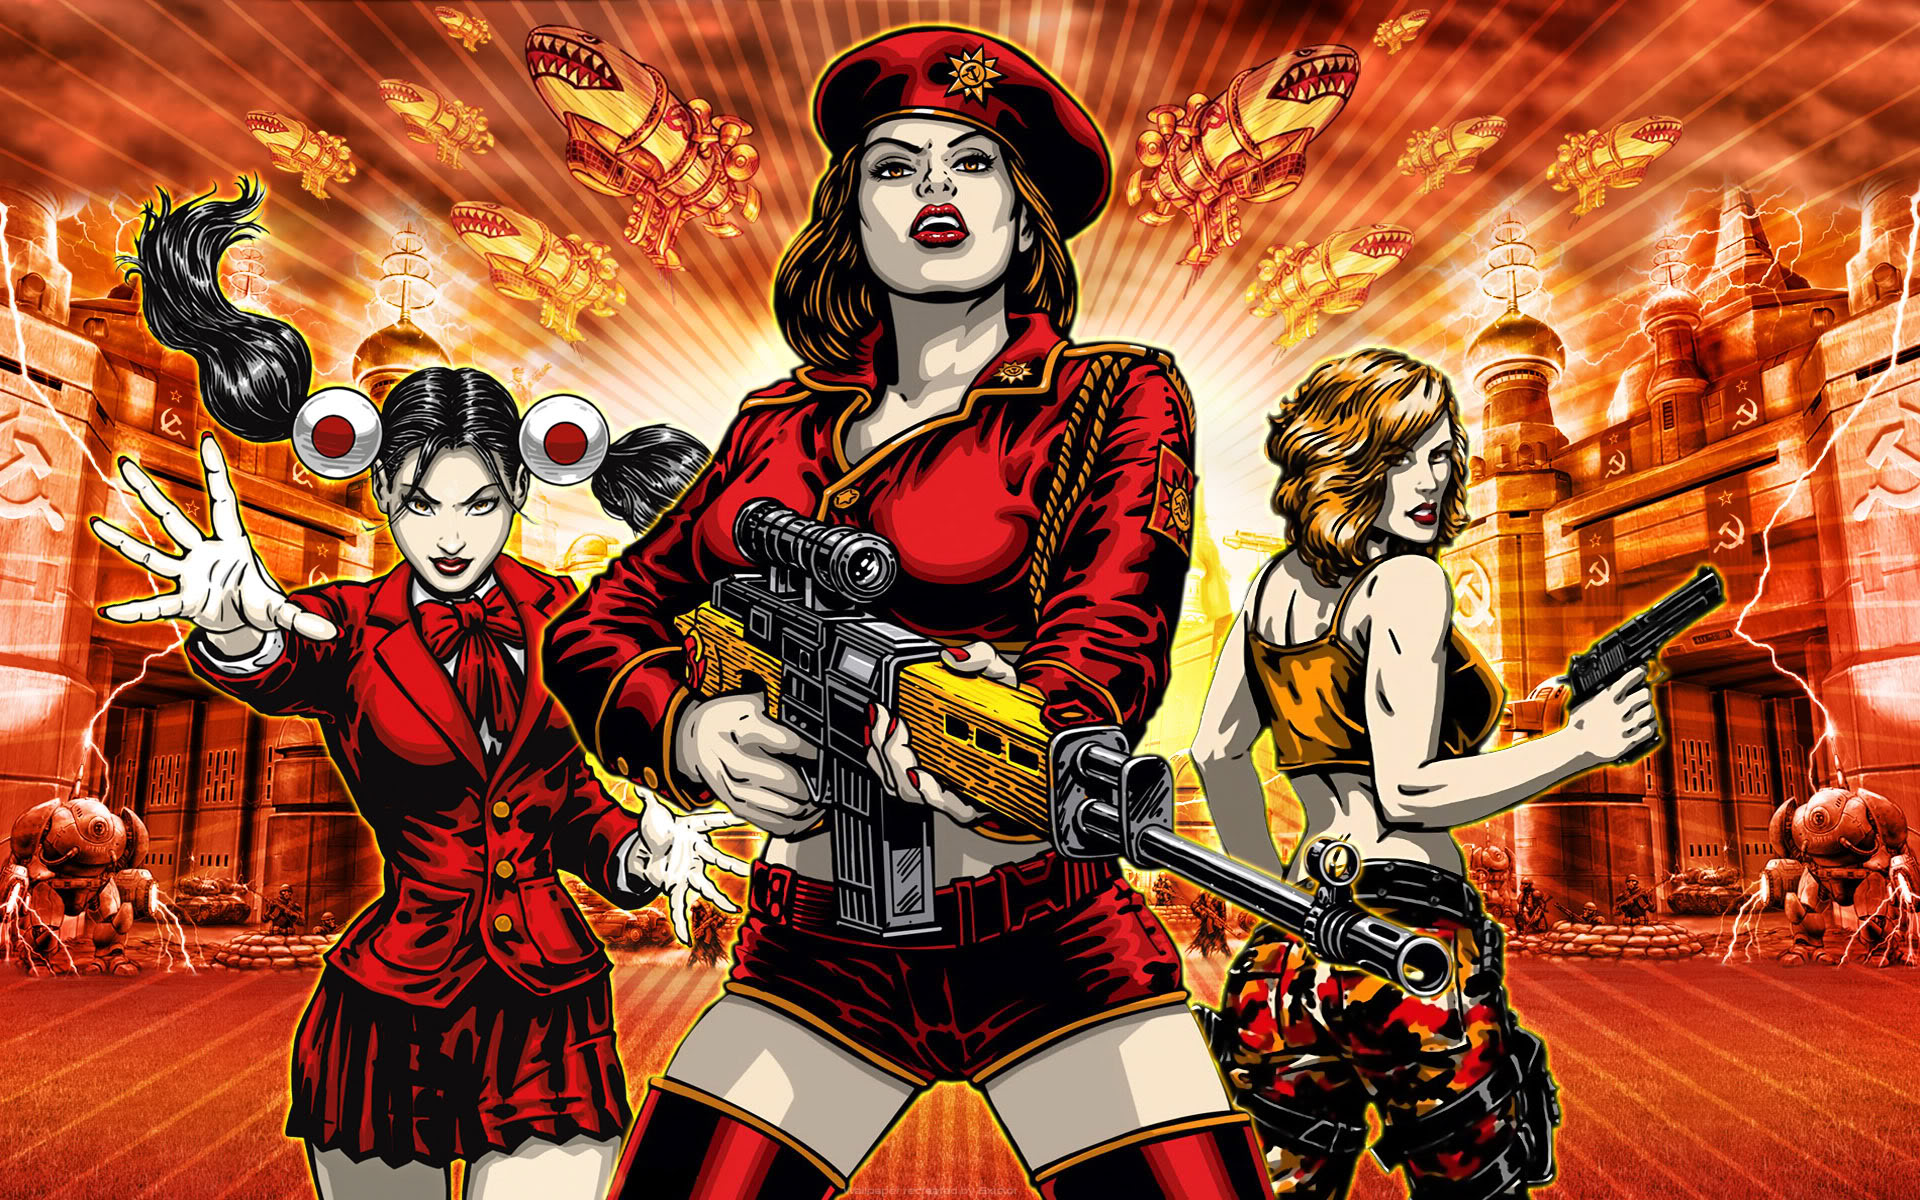 Command & Conquer: Red Alert 3 #21